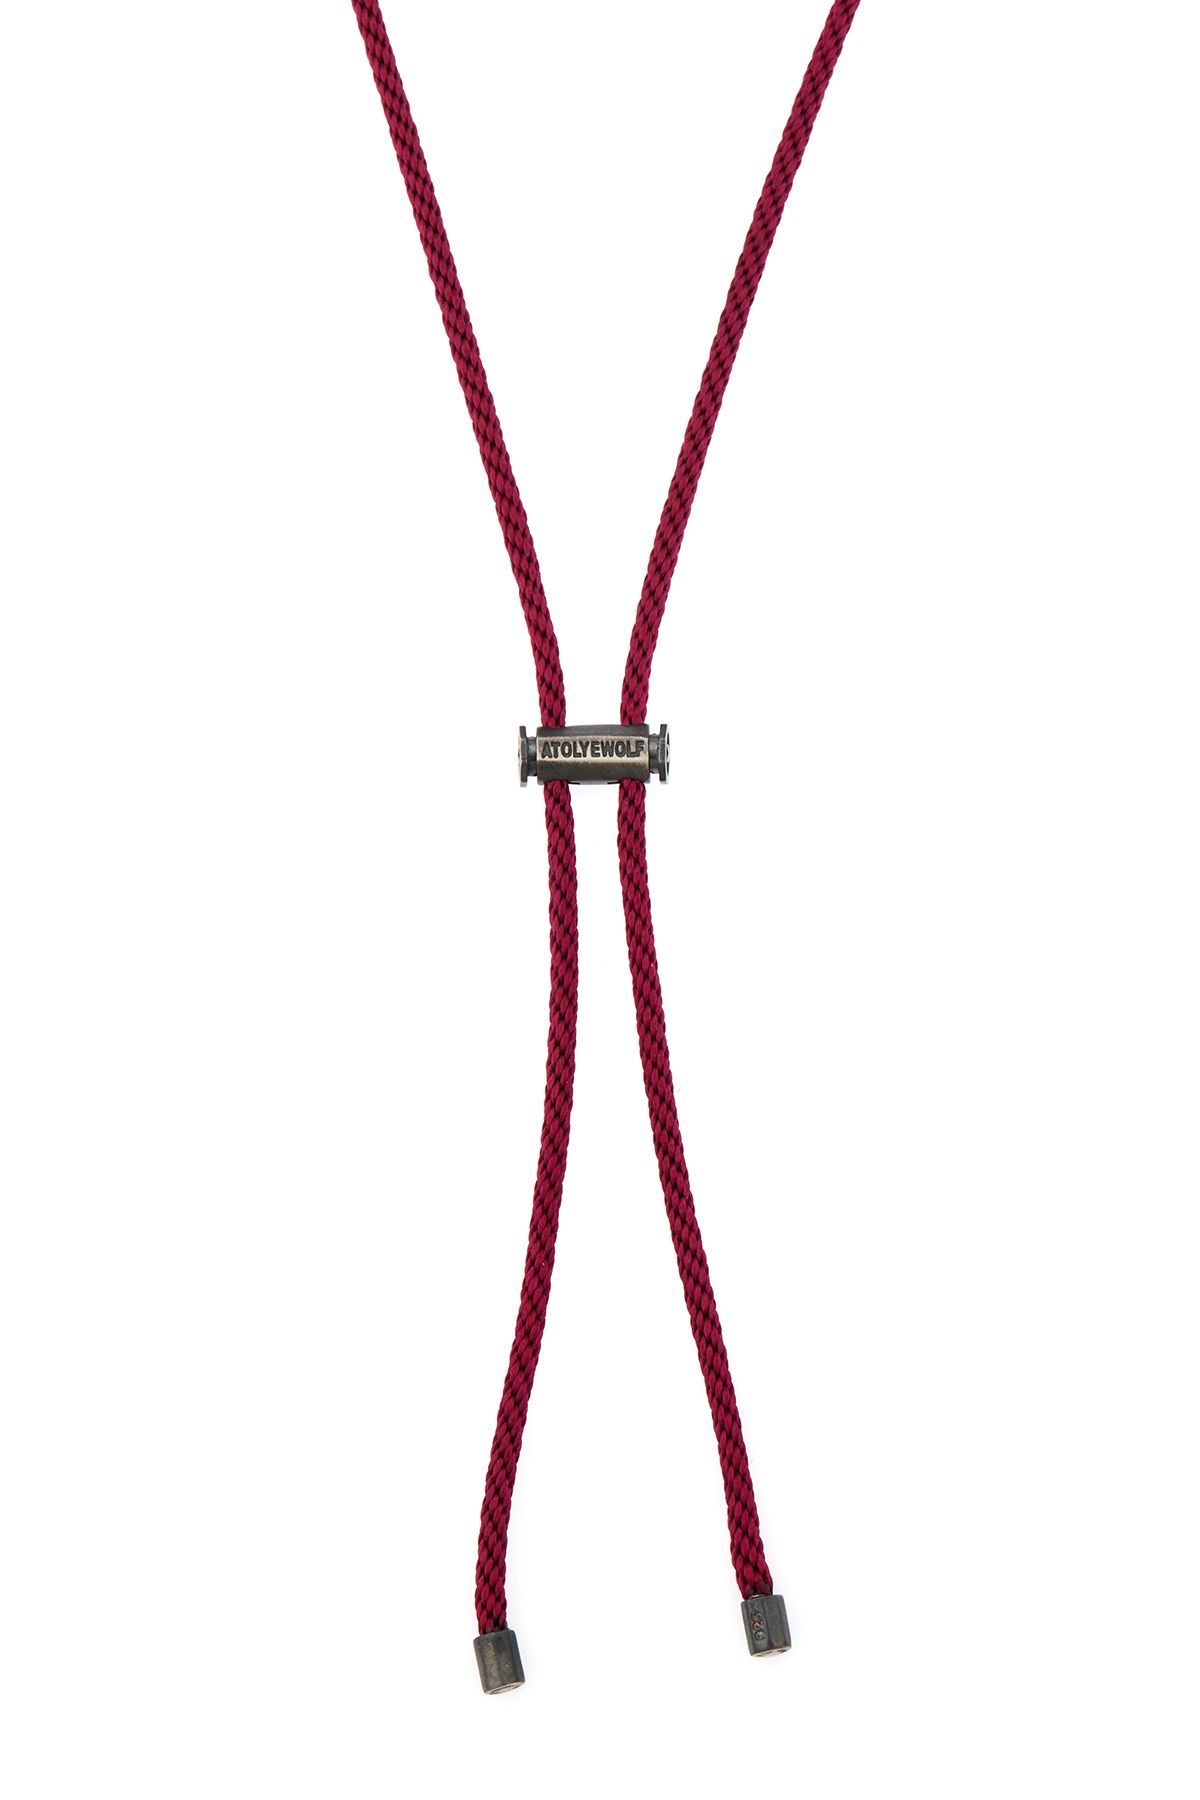 Atolyewolf Claret Red Lace Necklace in Oxide